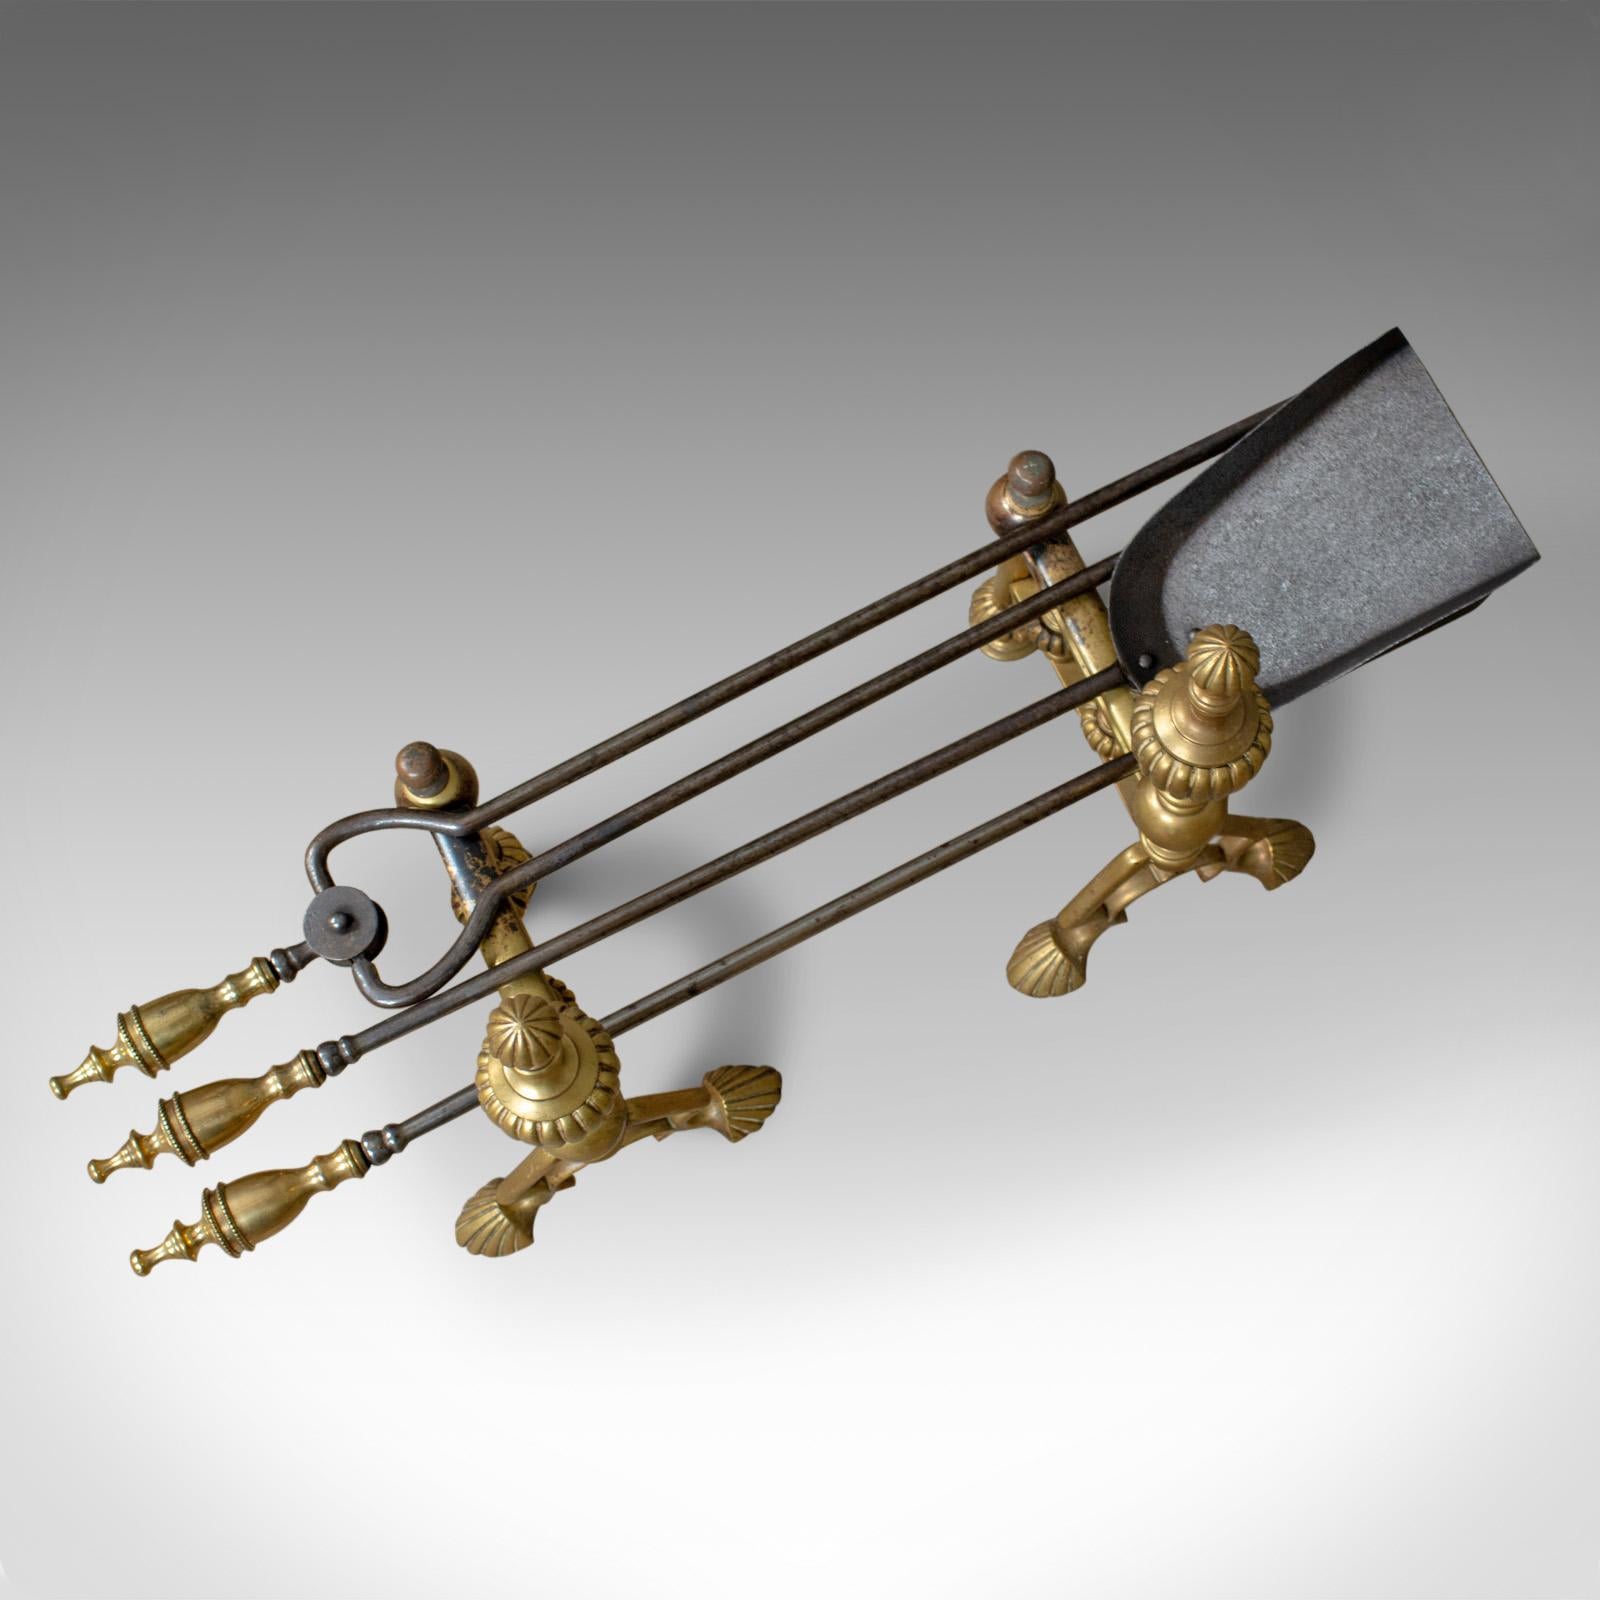 English Antique Companion Set of Fire Irons on Rests, Classical Revival, circa 1880